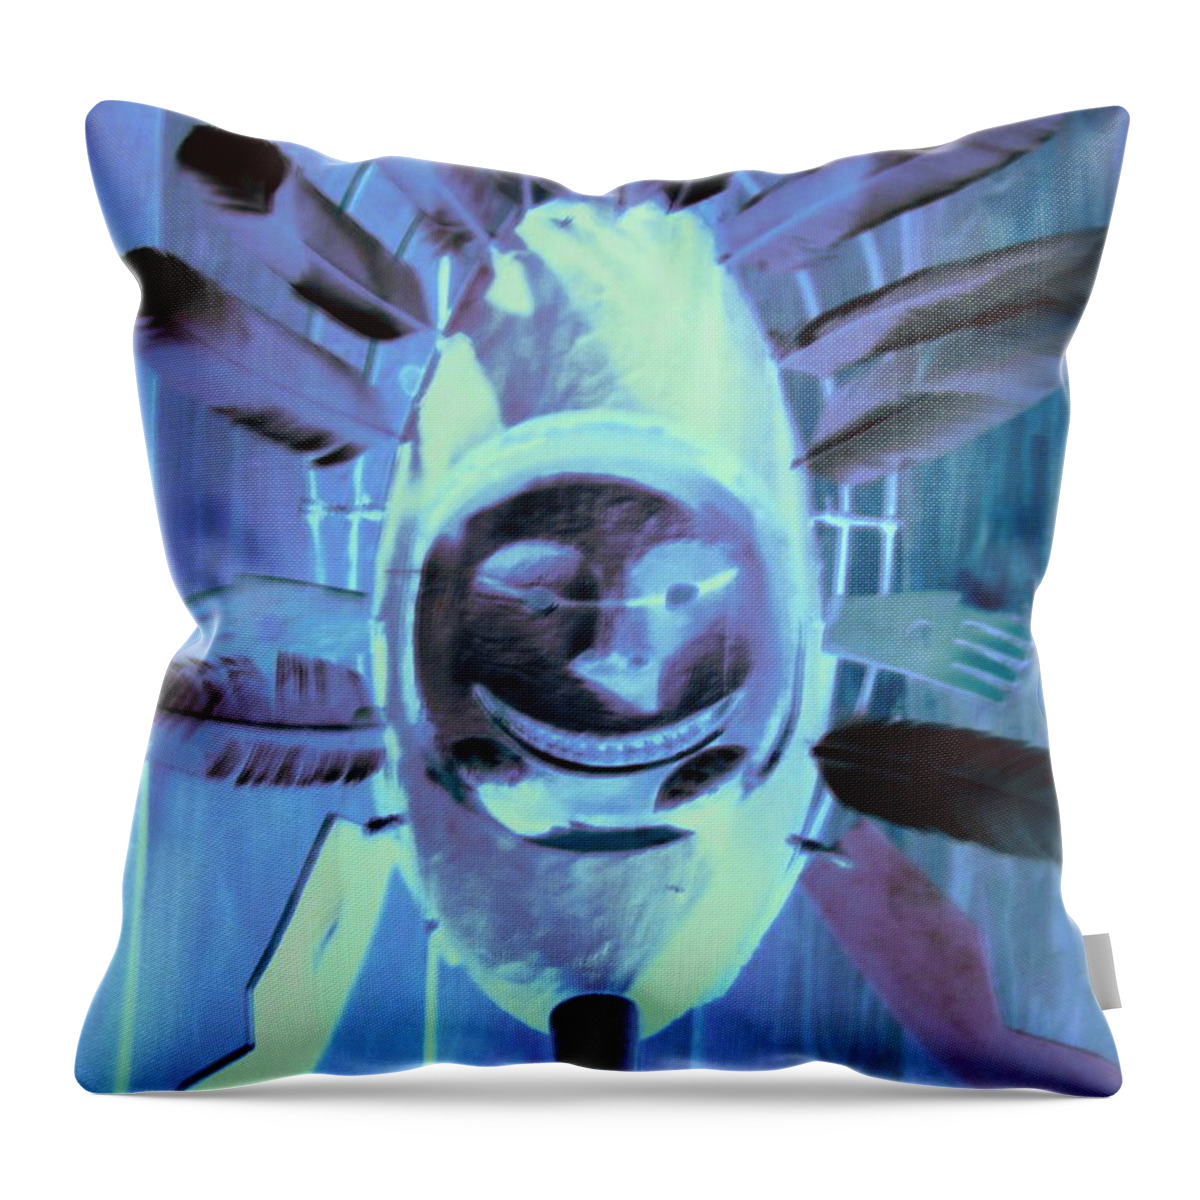 National Museum Of The American Indian Throw Pillow featuring the photograph National Museum Of The American Indian 9 by Randall Weidner